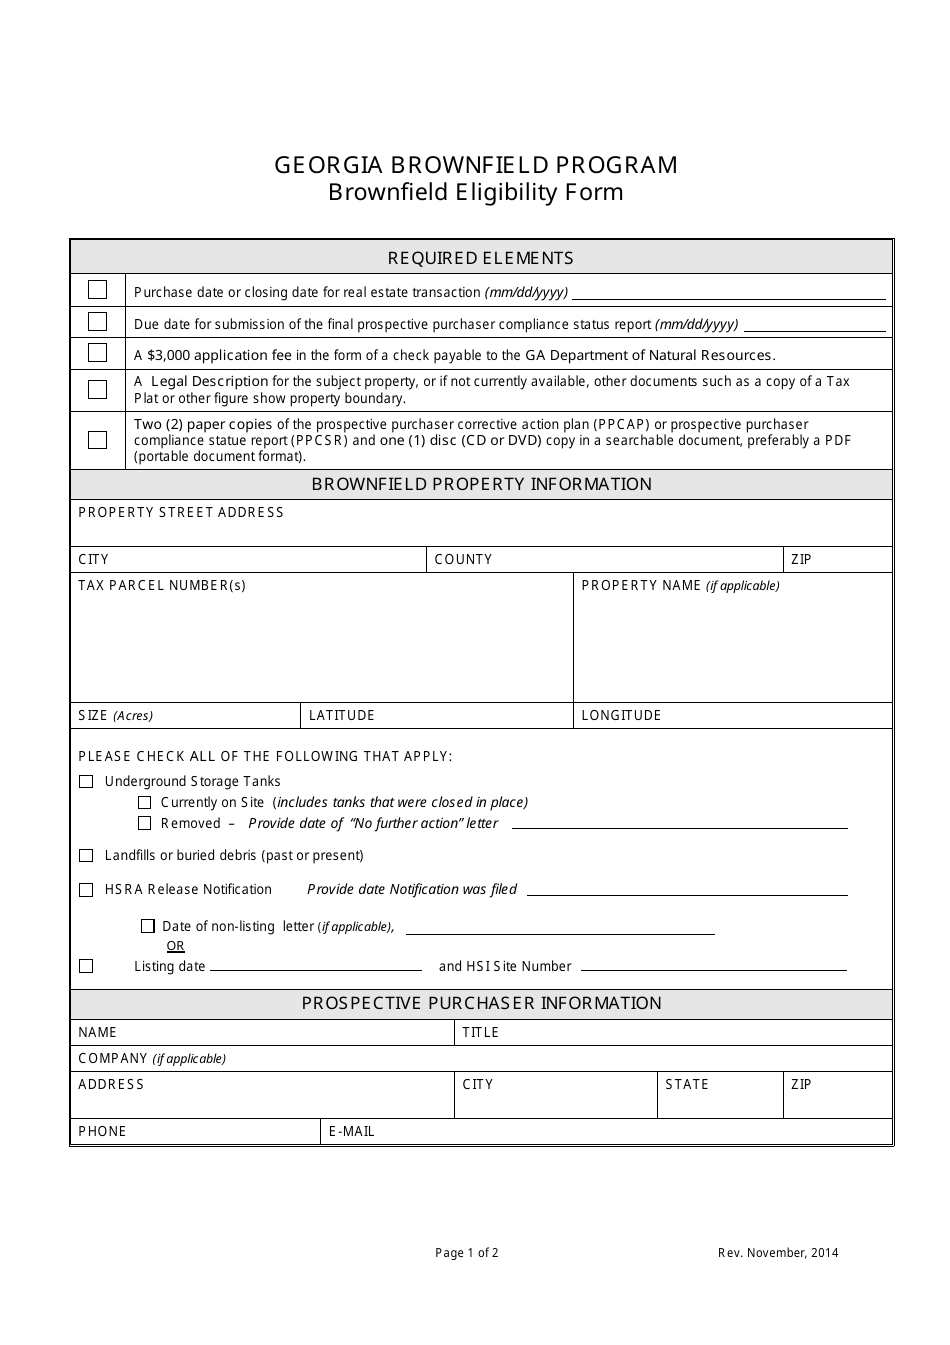 Brownfield Eligibility Form - Georgia (United States), Page 1